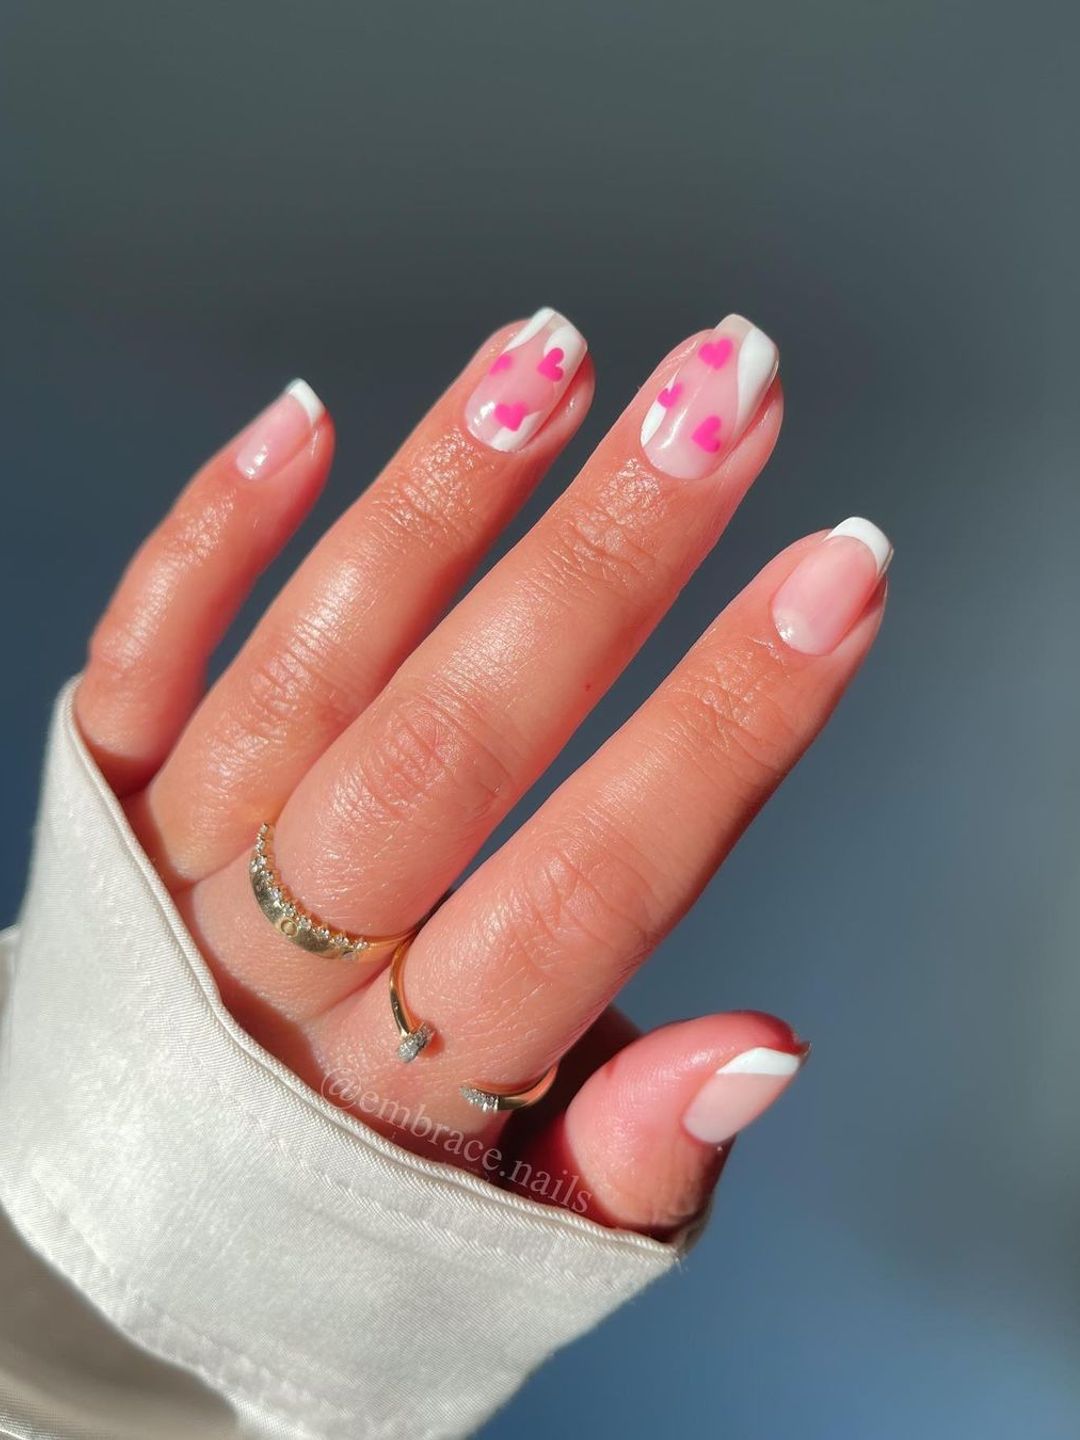 Nails with pink hearts and white tips 